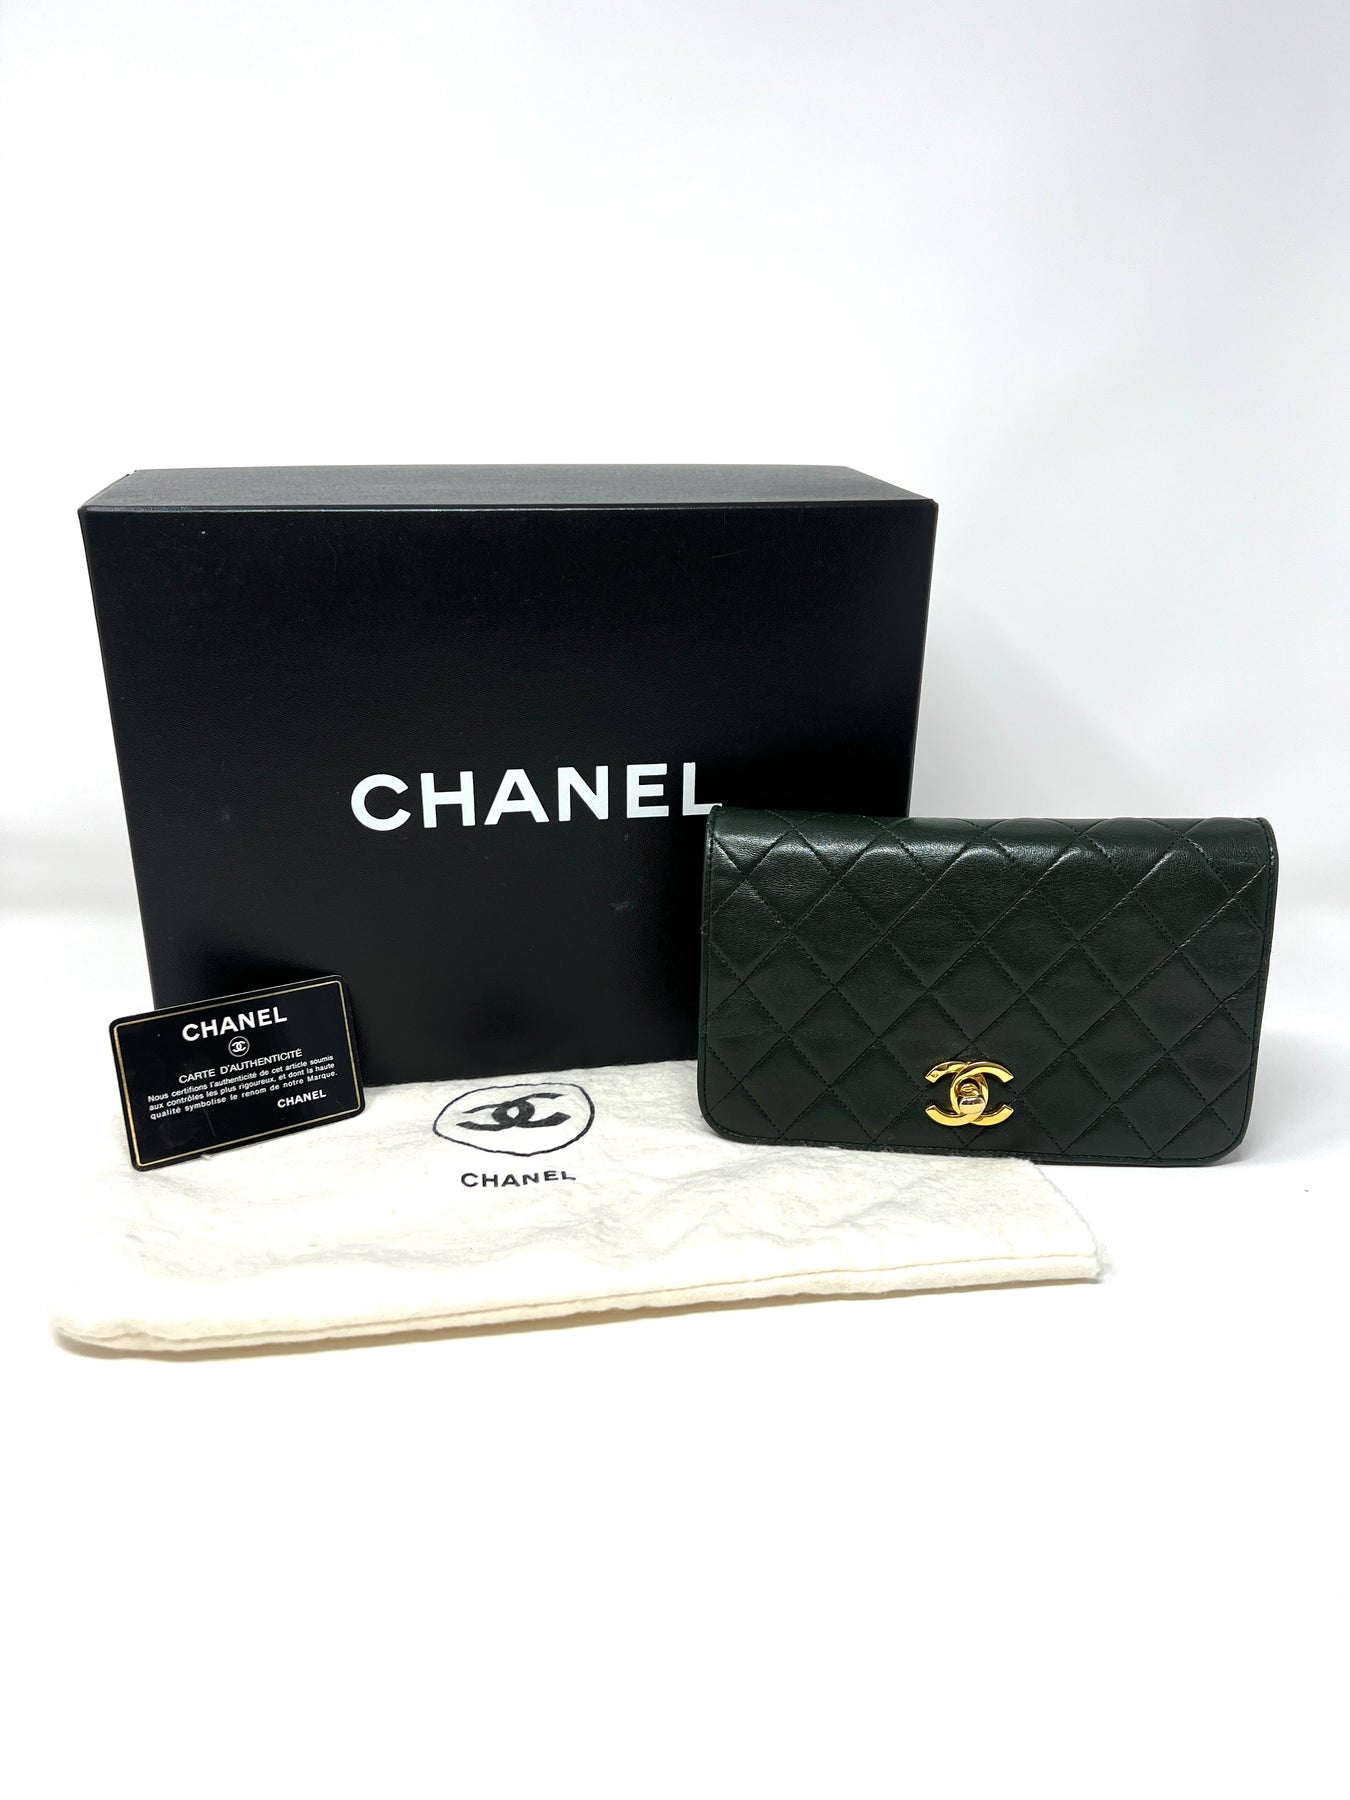 Chanel Caviar BEIGE Vintage Quilted Classic Diana Flap Bag RARE